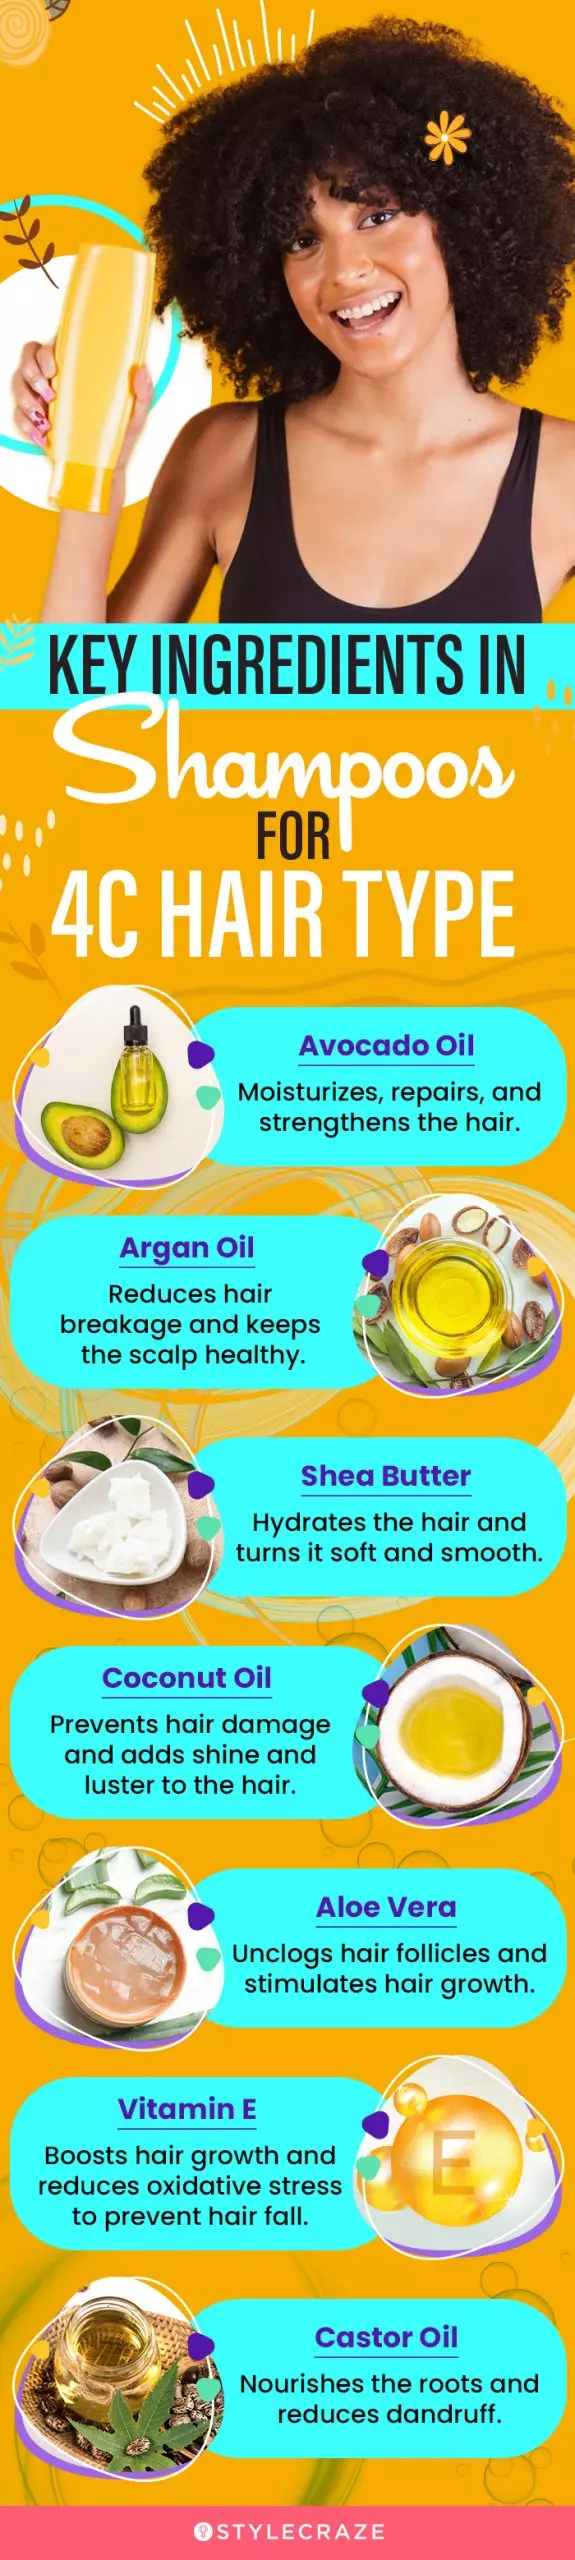 Key Ingredients In Shampoos For 4C Type Hair (infographic)